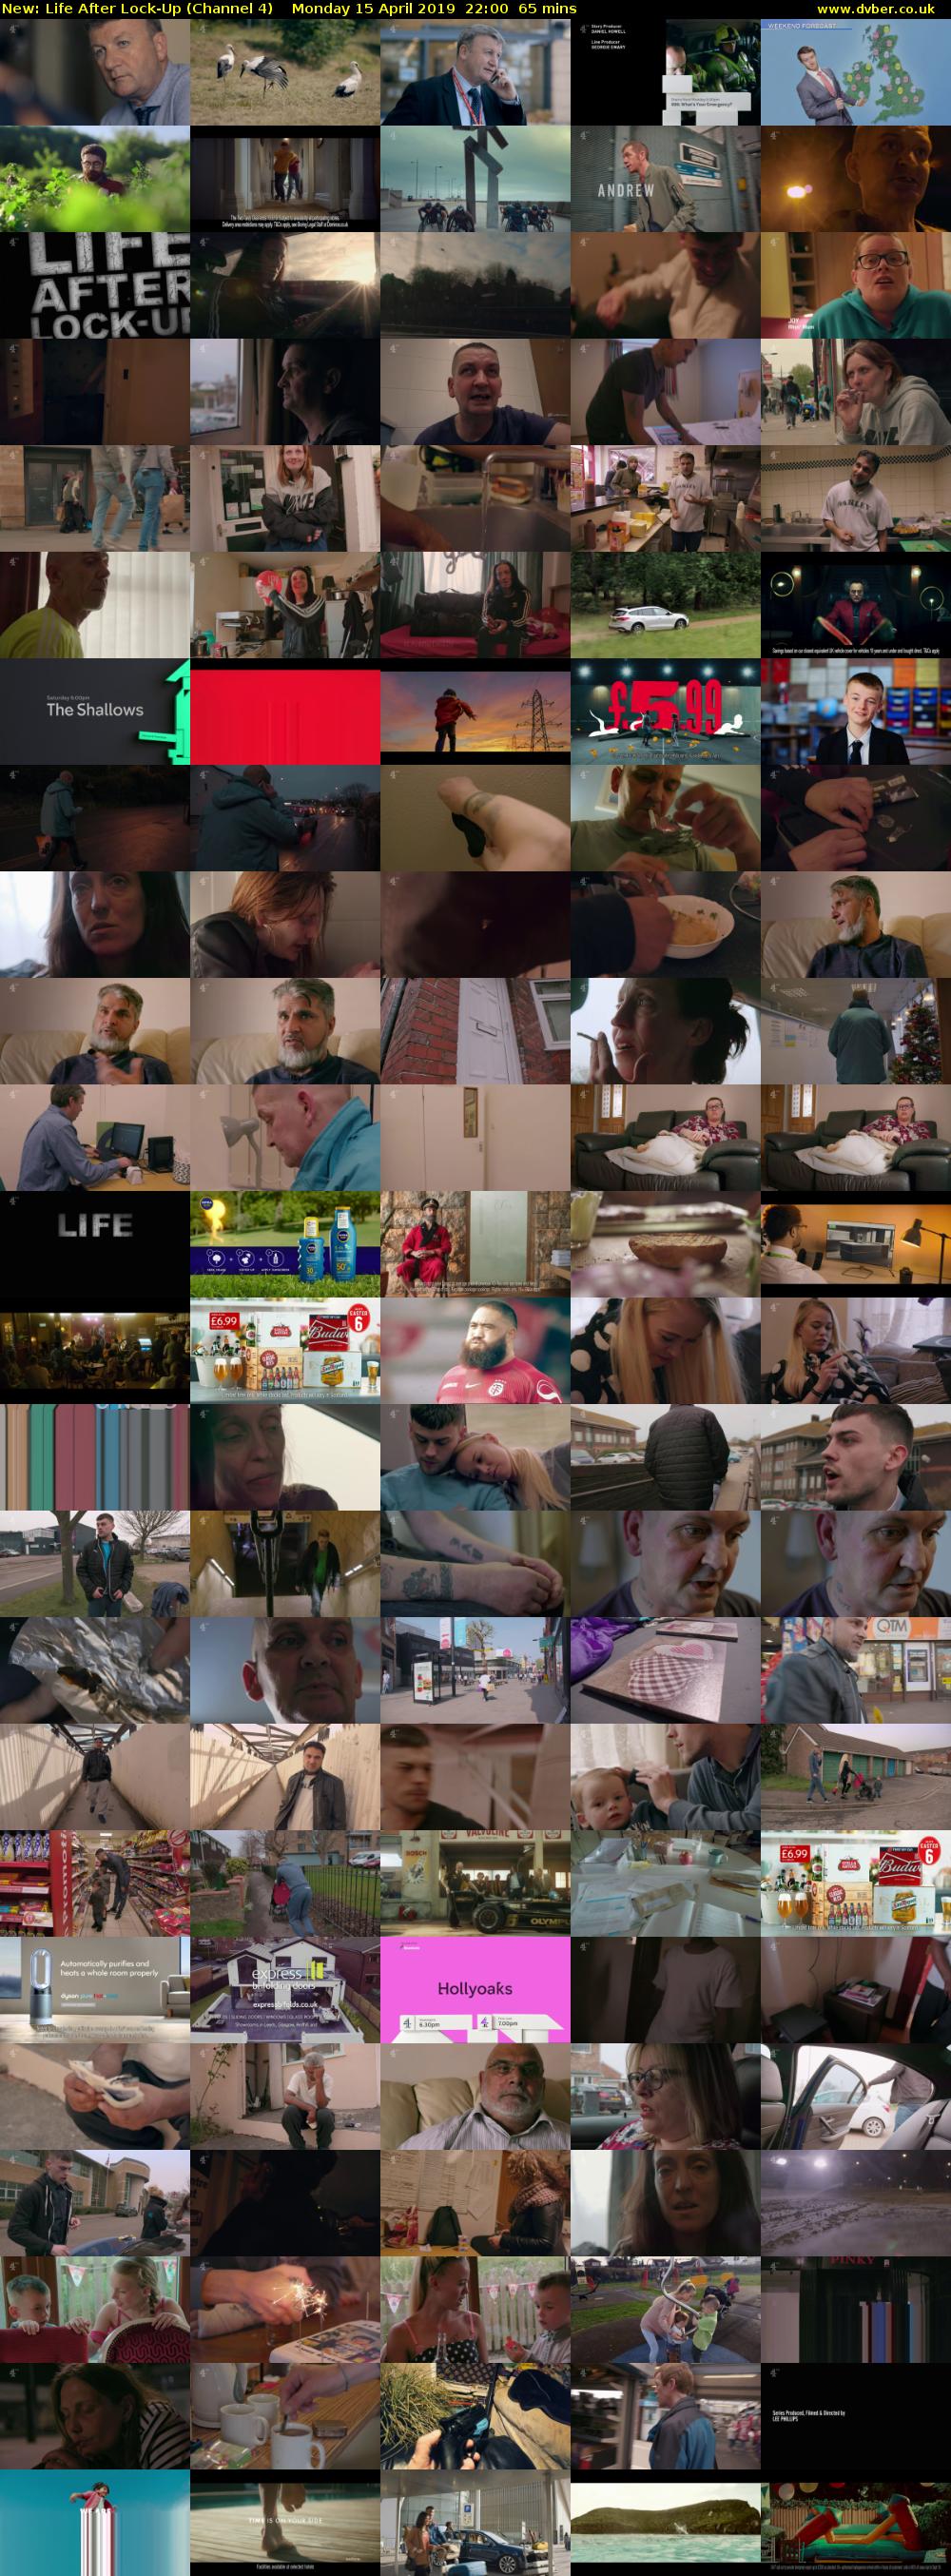 Life After Lock-Up (Channel 4) Monday 15 April 2019 22:00 - 23:05